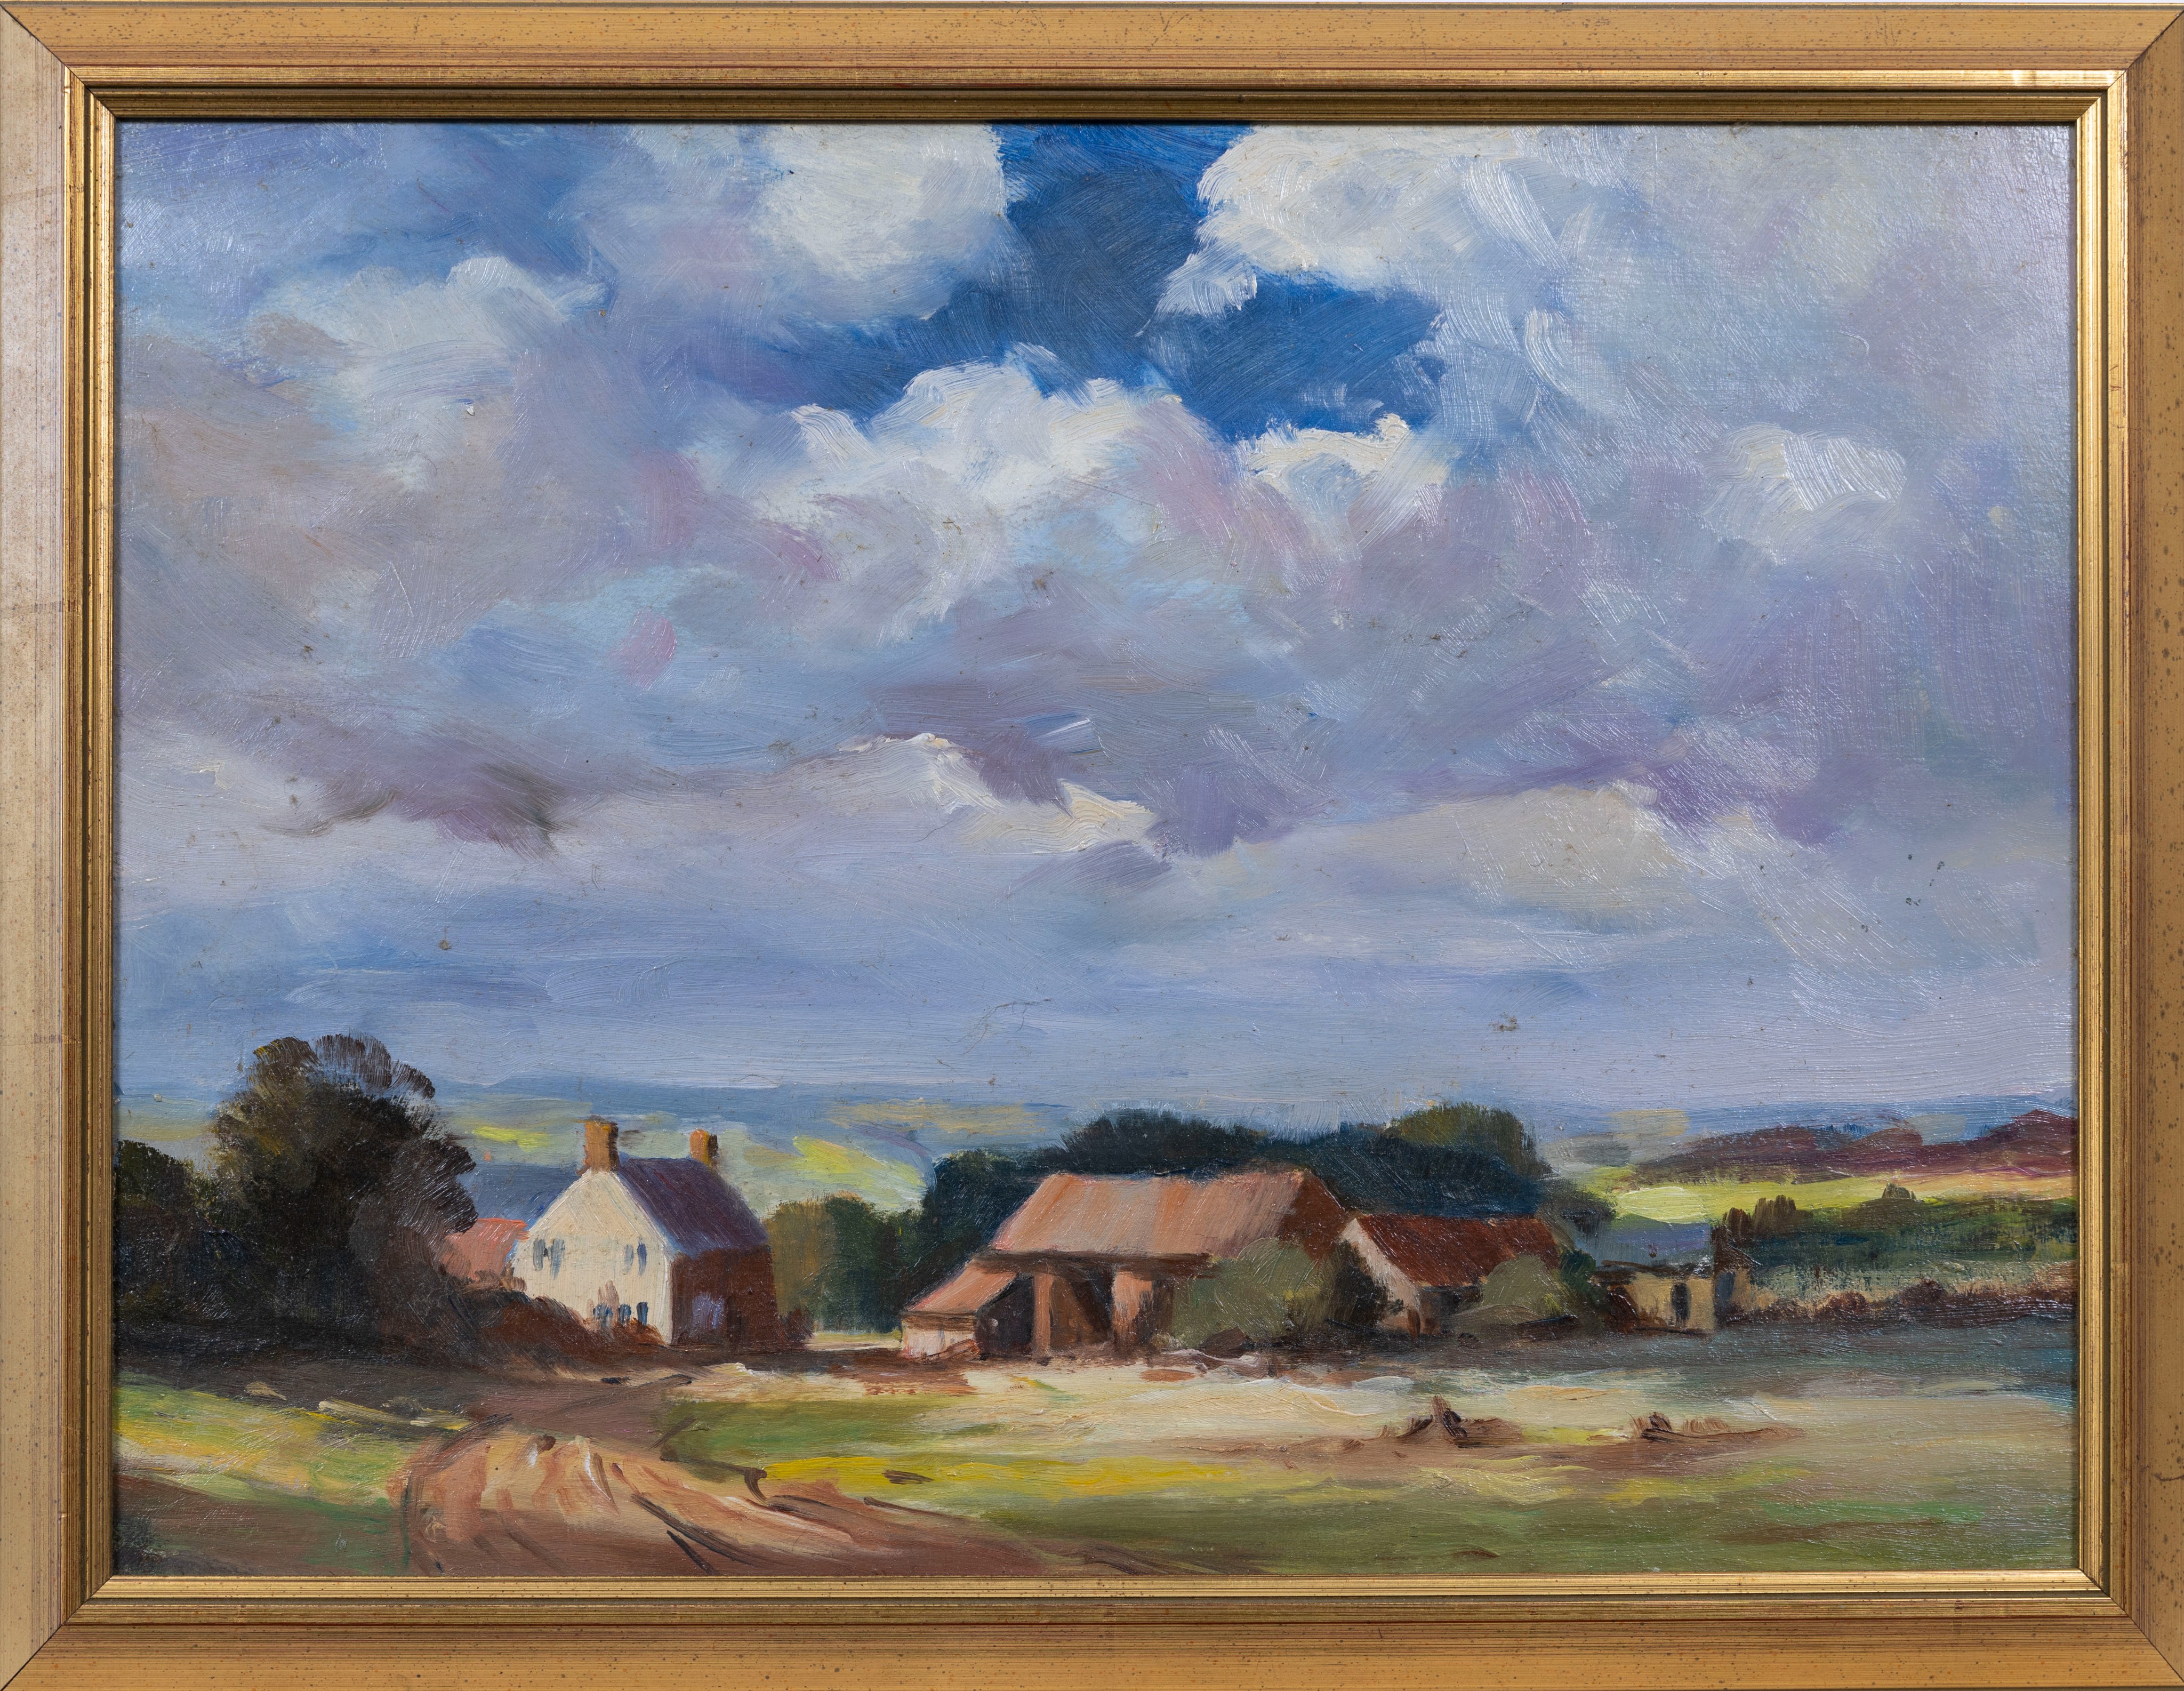 Attributed to John Foulger (British, 1943-2007), The Farm, oil on board, framed, 11½ x 15½in. (29.